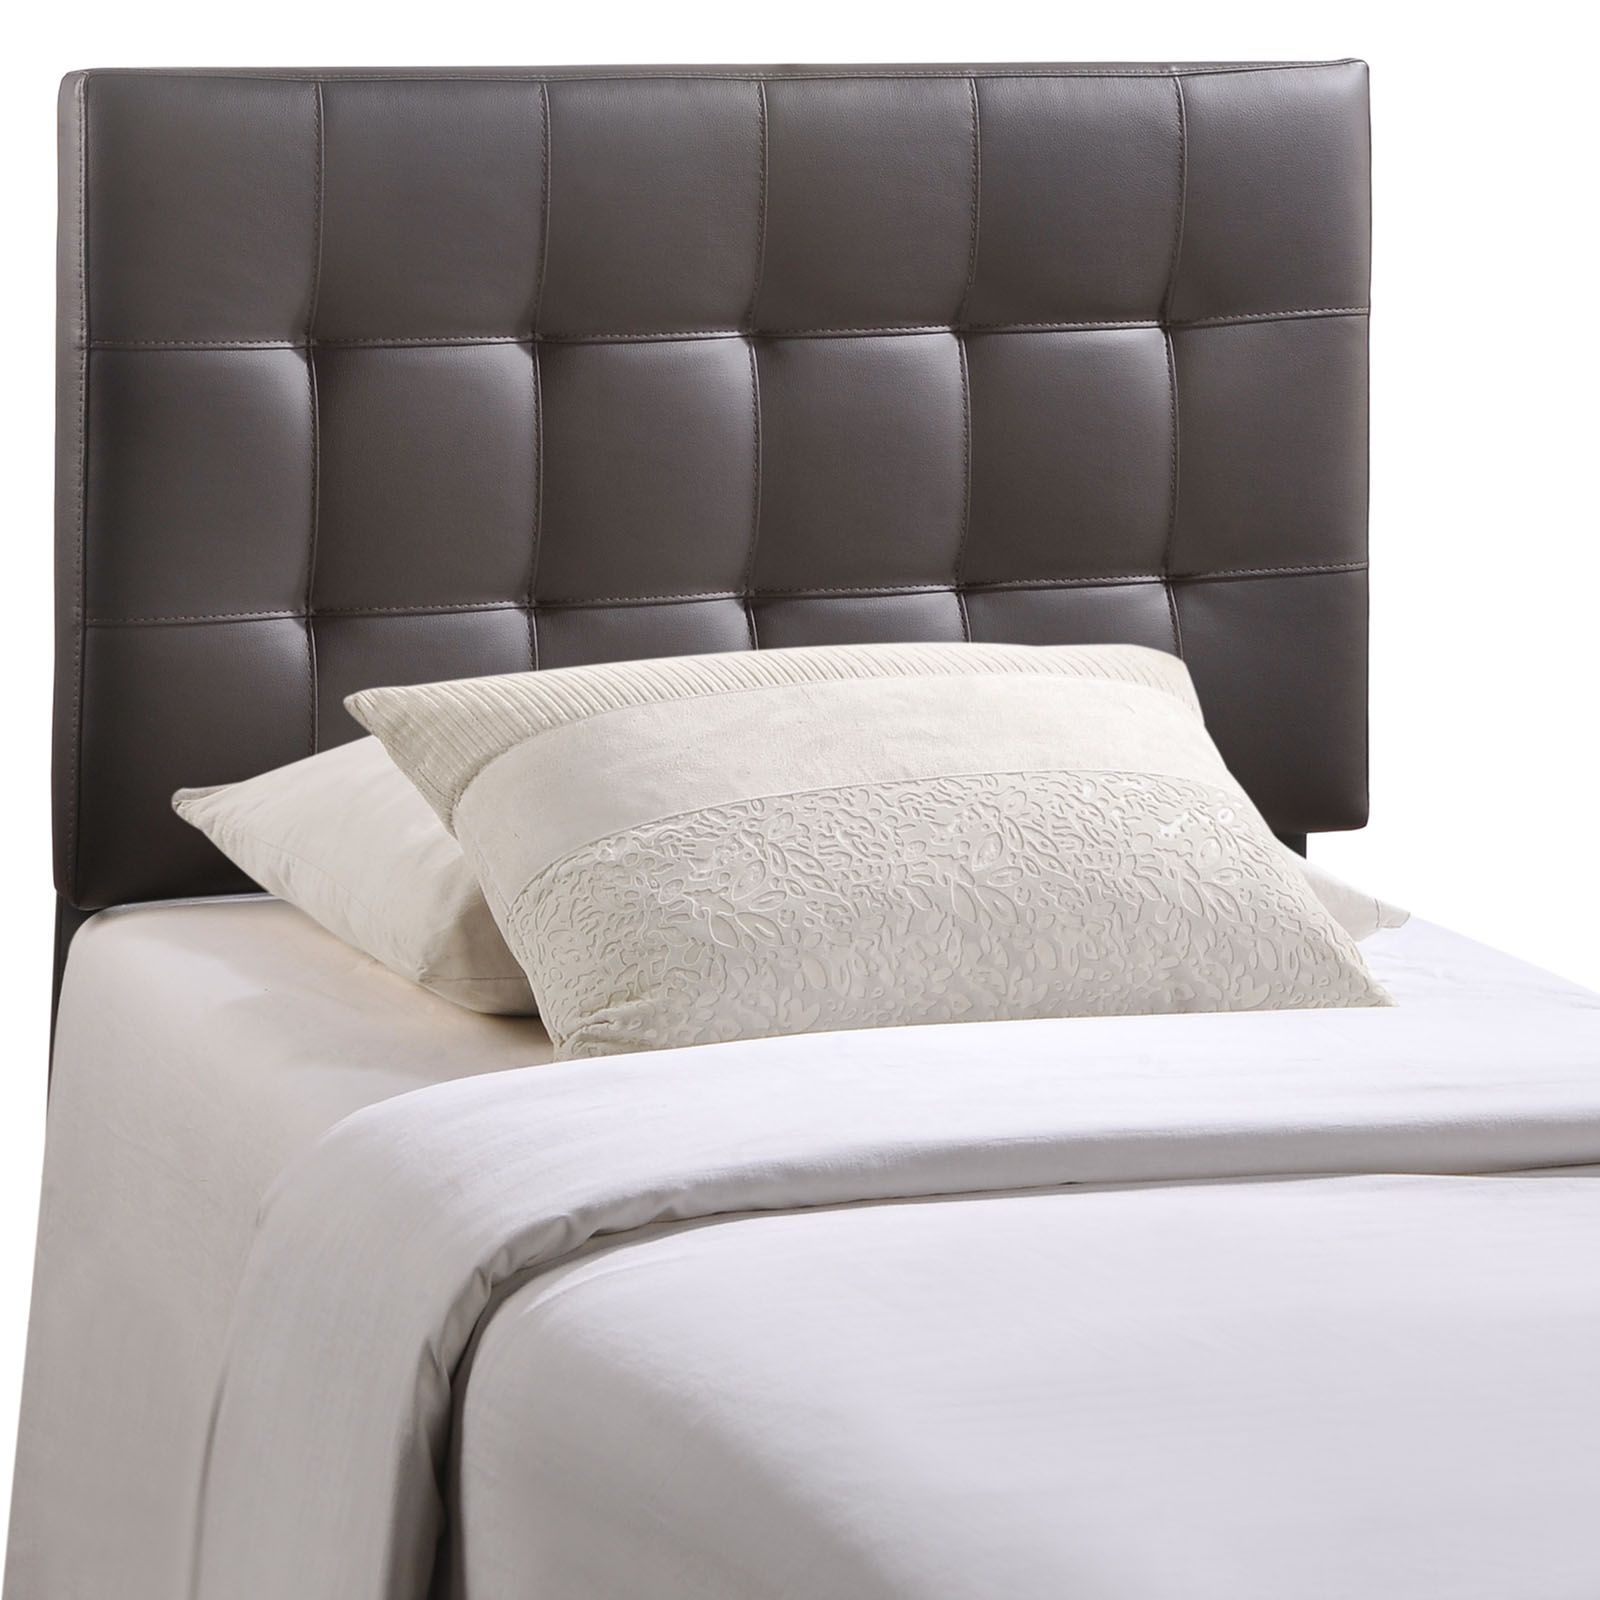 Modway Lily Twin Upholstered Vinyl Headboard in Brown - image 2 of 5